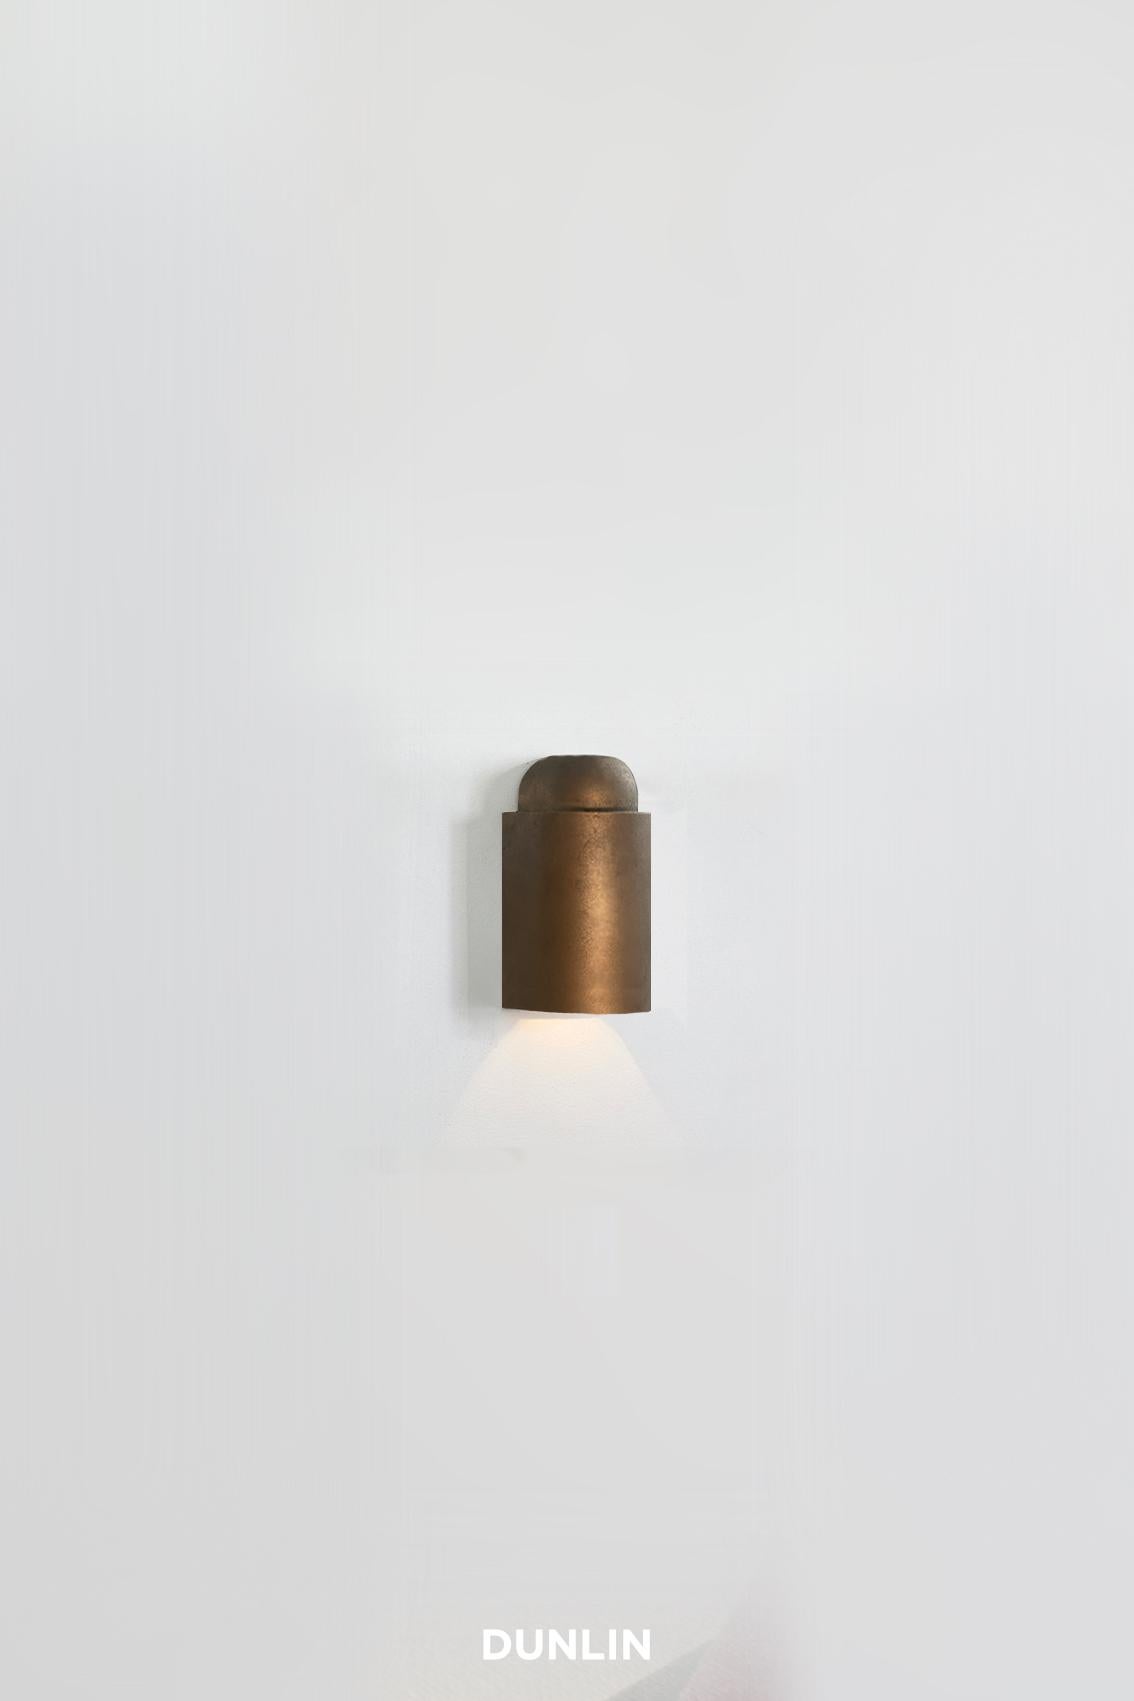 
Introducing the Decade Mini Step Light: Designed in Sydney, Australia by Dunlin, the Decade Mini Wall Light epitomises sophistication, serving as an excellent option for stairway lighting. Its robust build guarantees adaptability, seamlessly